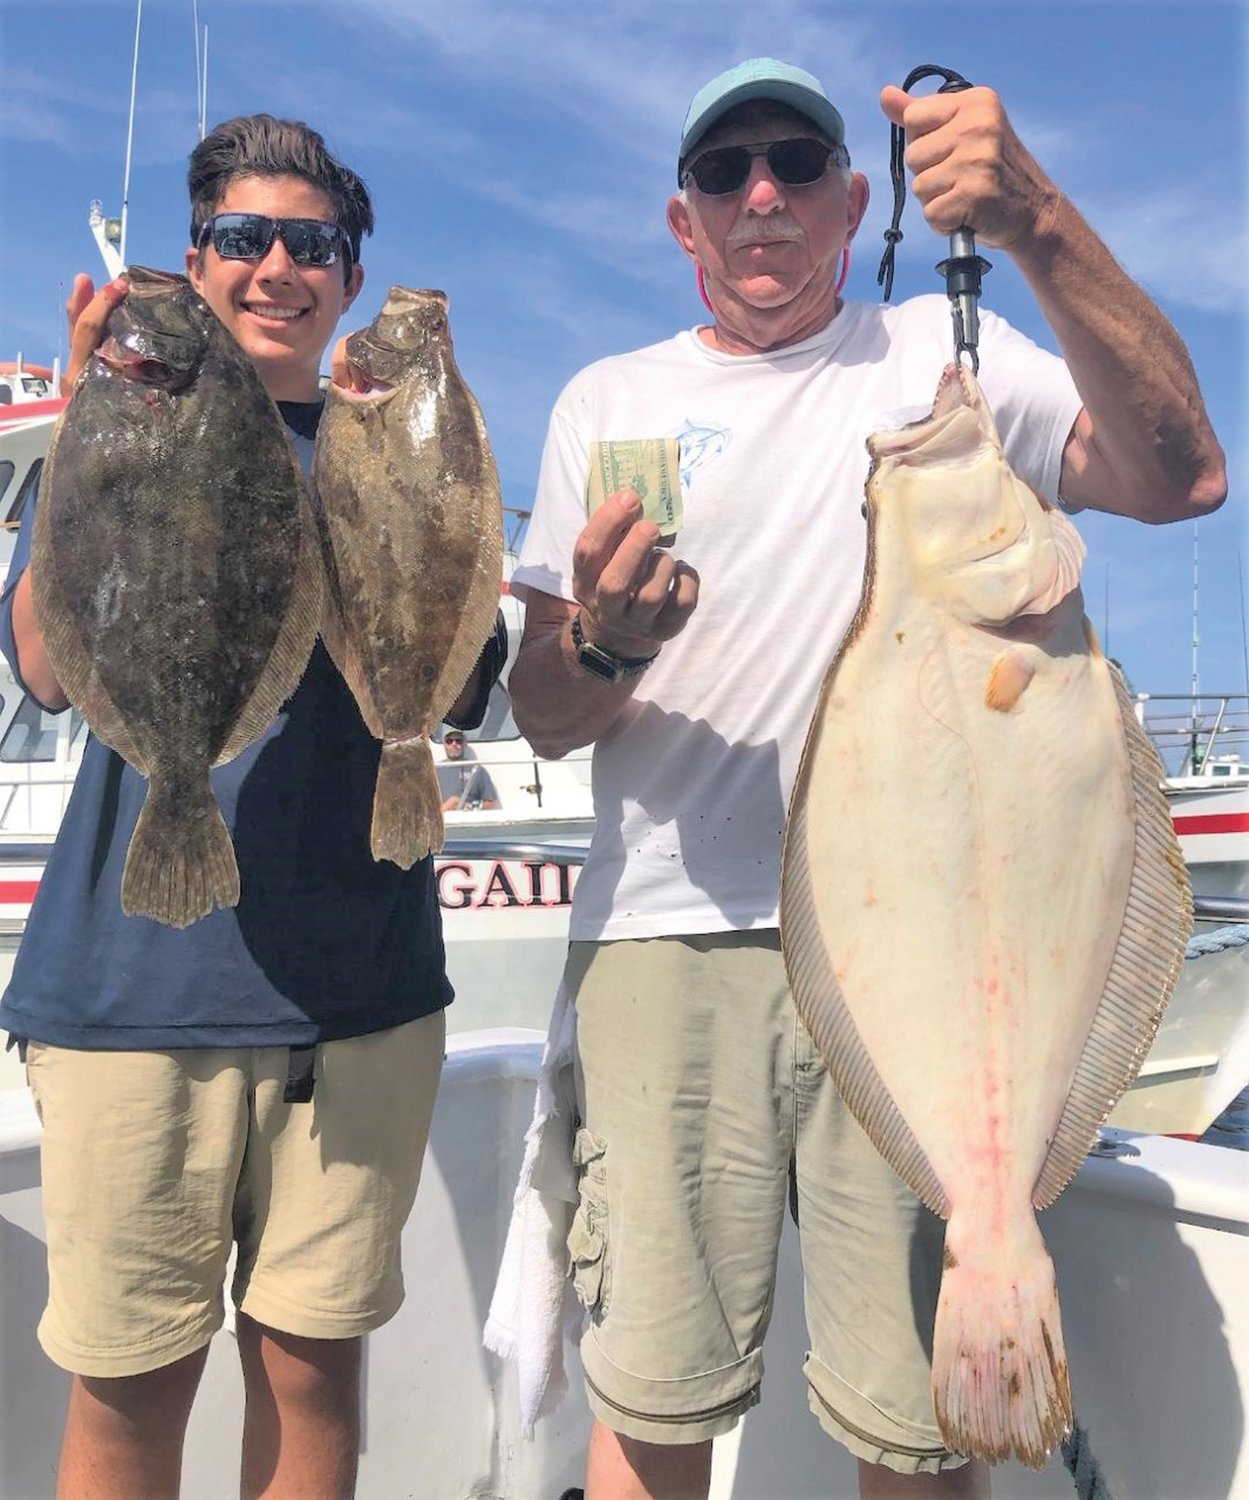 TOP PRIZE: Jack Guarnaccia with the 9.75-pound summer flounder he caught during the RI Saltwater Anglers Association fluke trip last weekend. Shown with his grandson Max Namba. (Submitted photos)